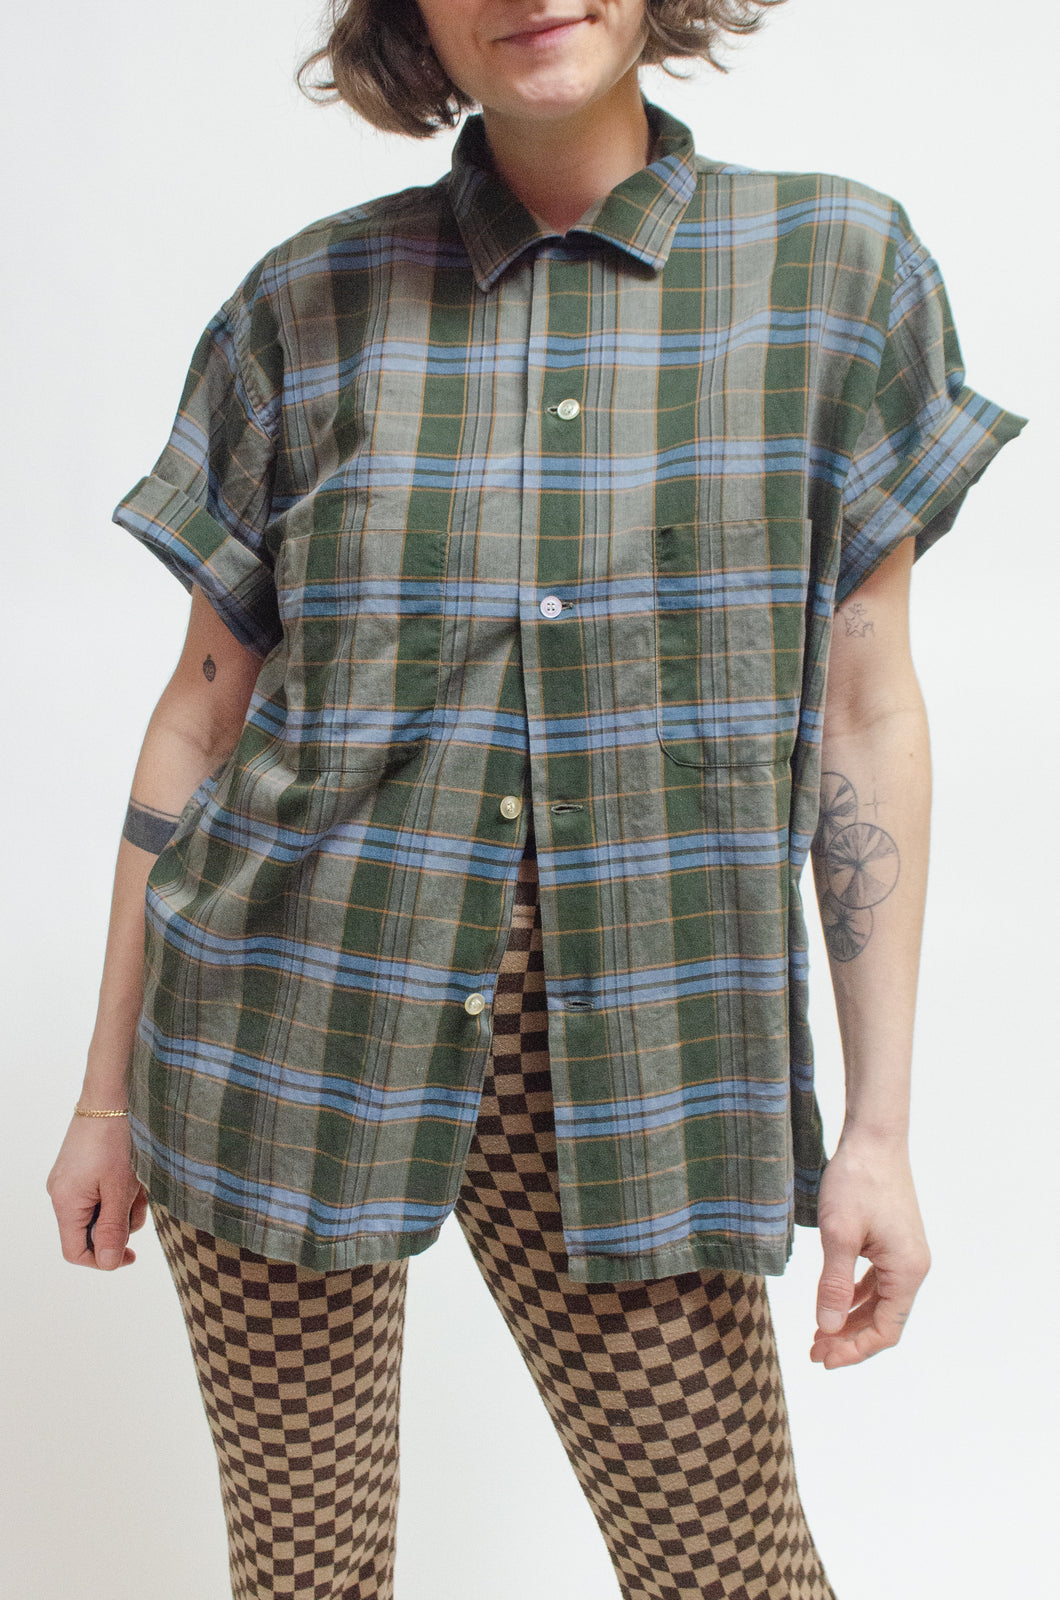 Penny’s plaid button up